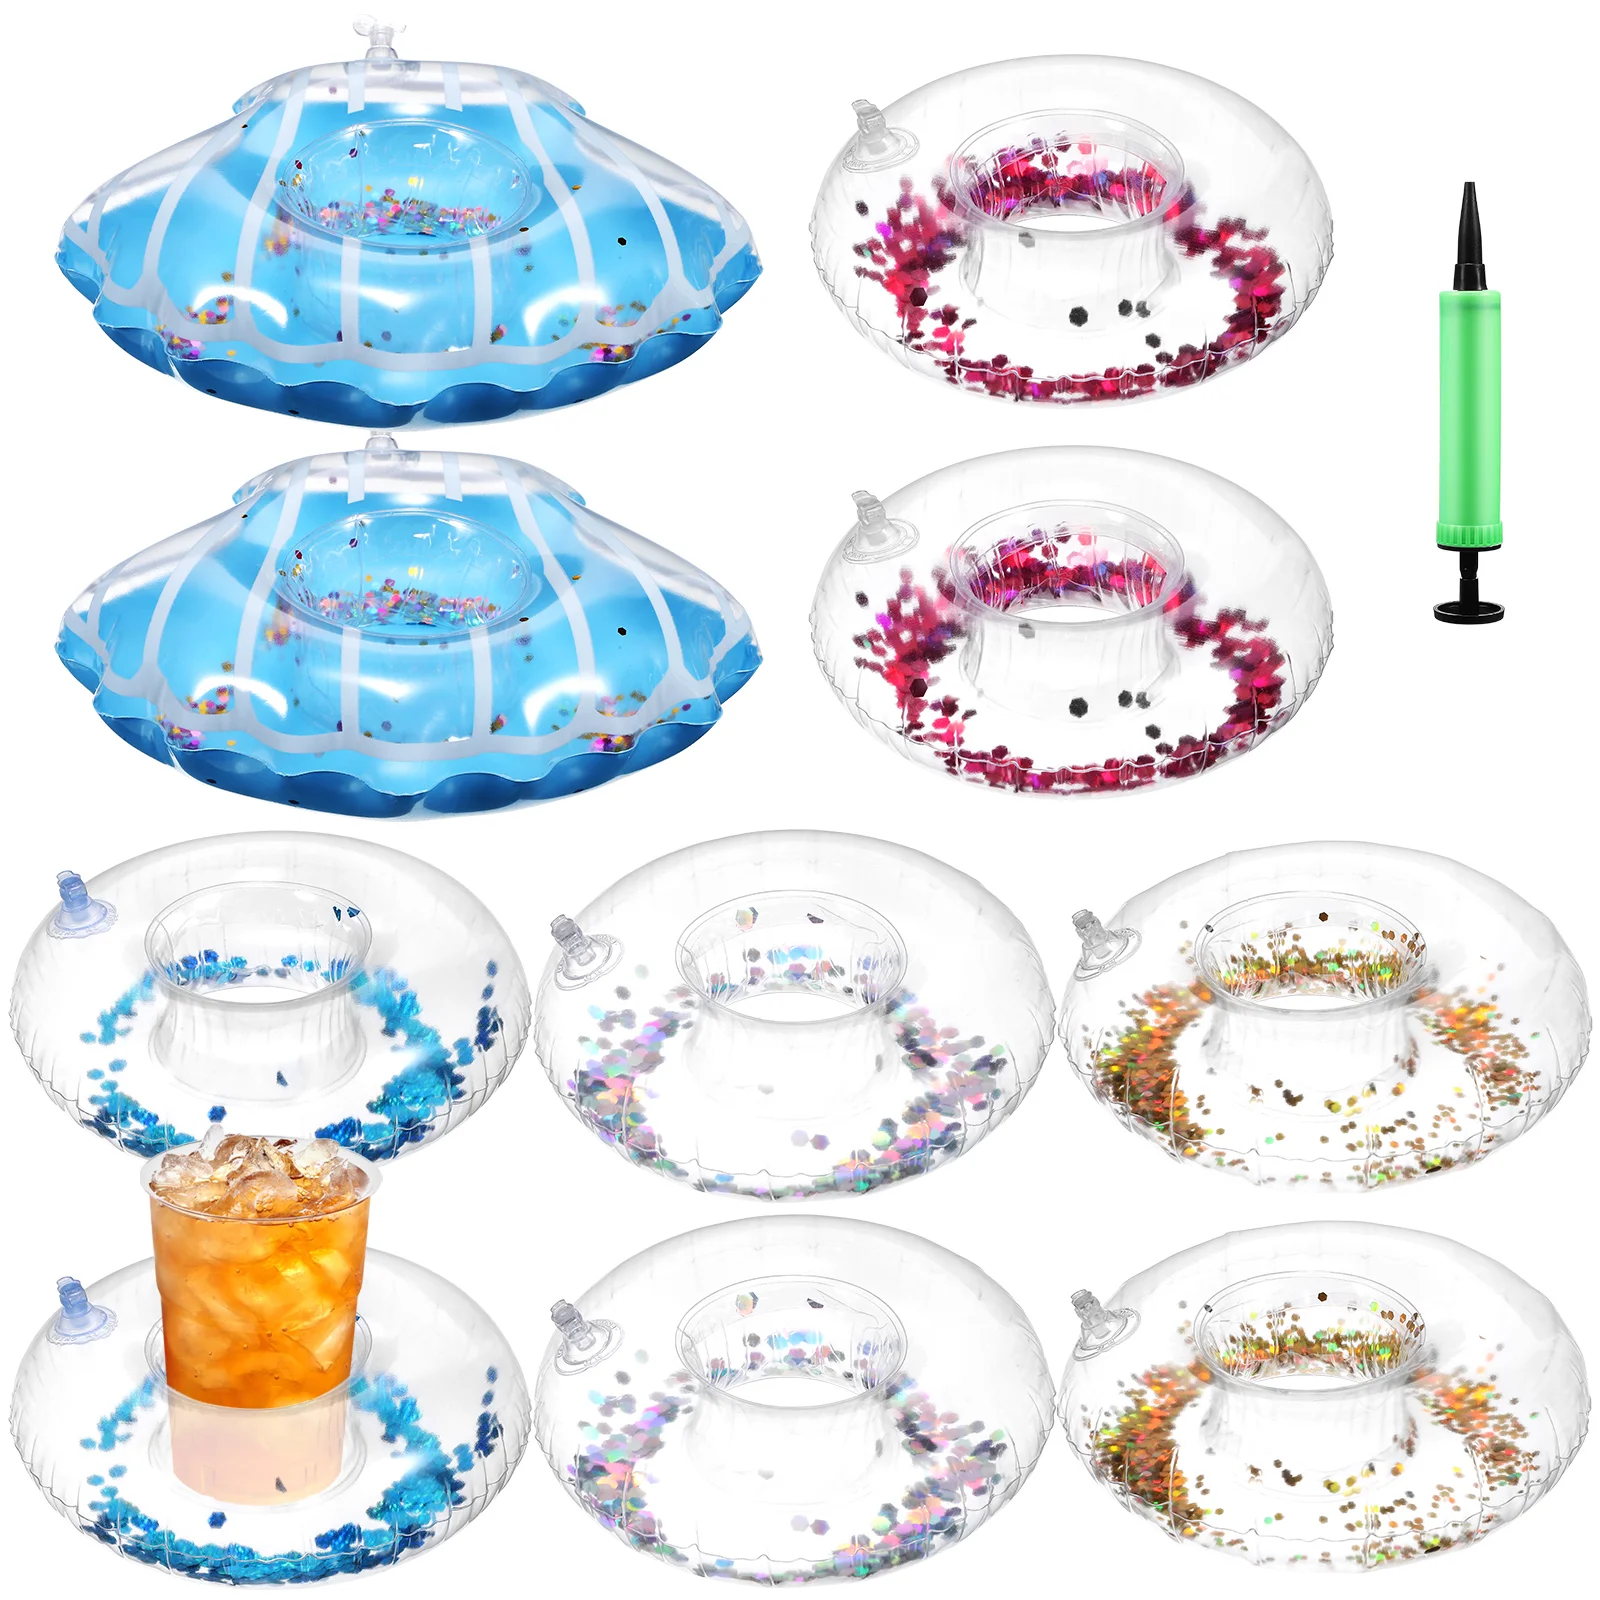 

10 Pcs Drink Floats Inflatable Bottle Pool Floating Holder Coaster Swimming Cup Air Pump Pvc